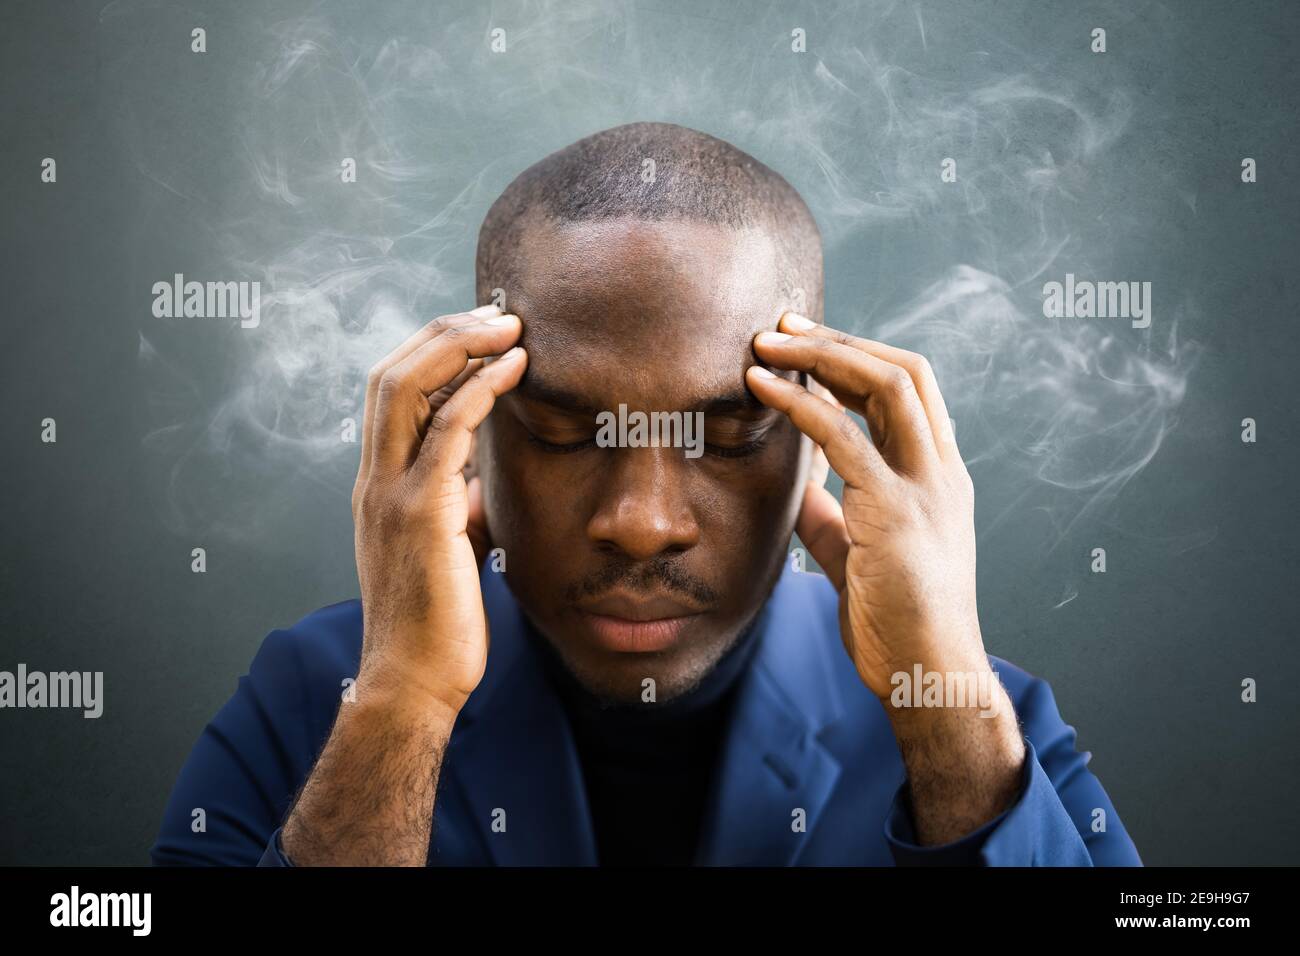 Business Stress Management. Angry Smoking Unhappy Man Stock Photo